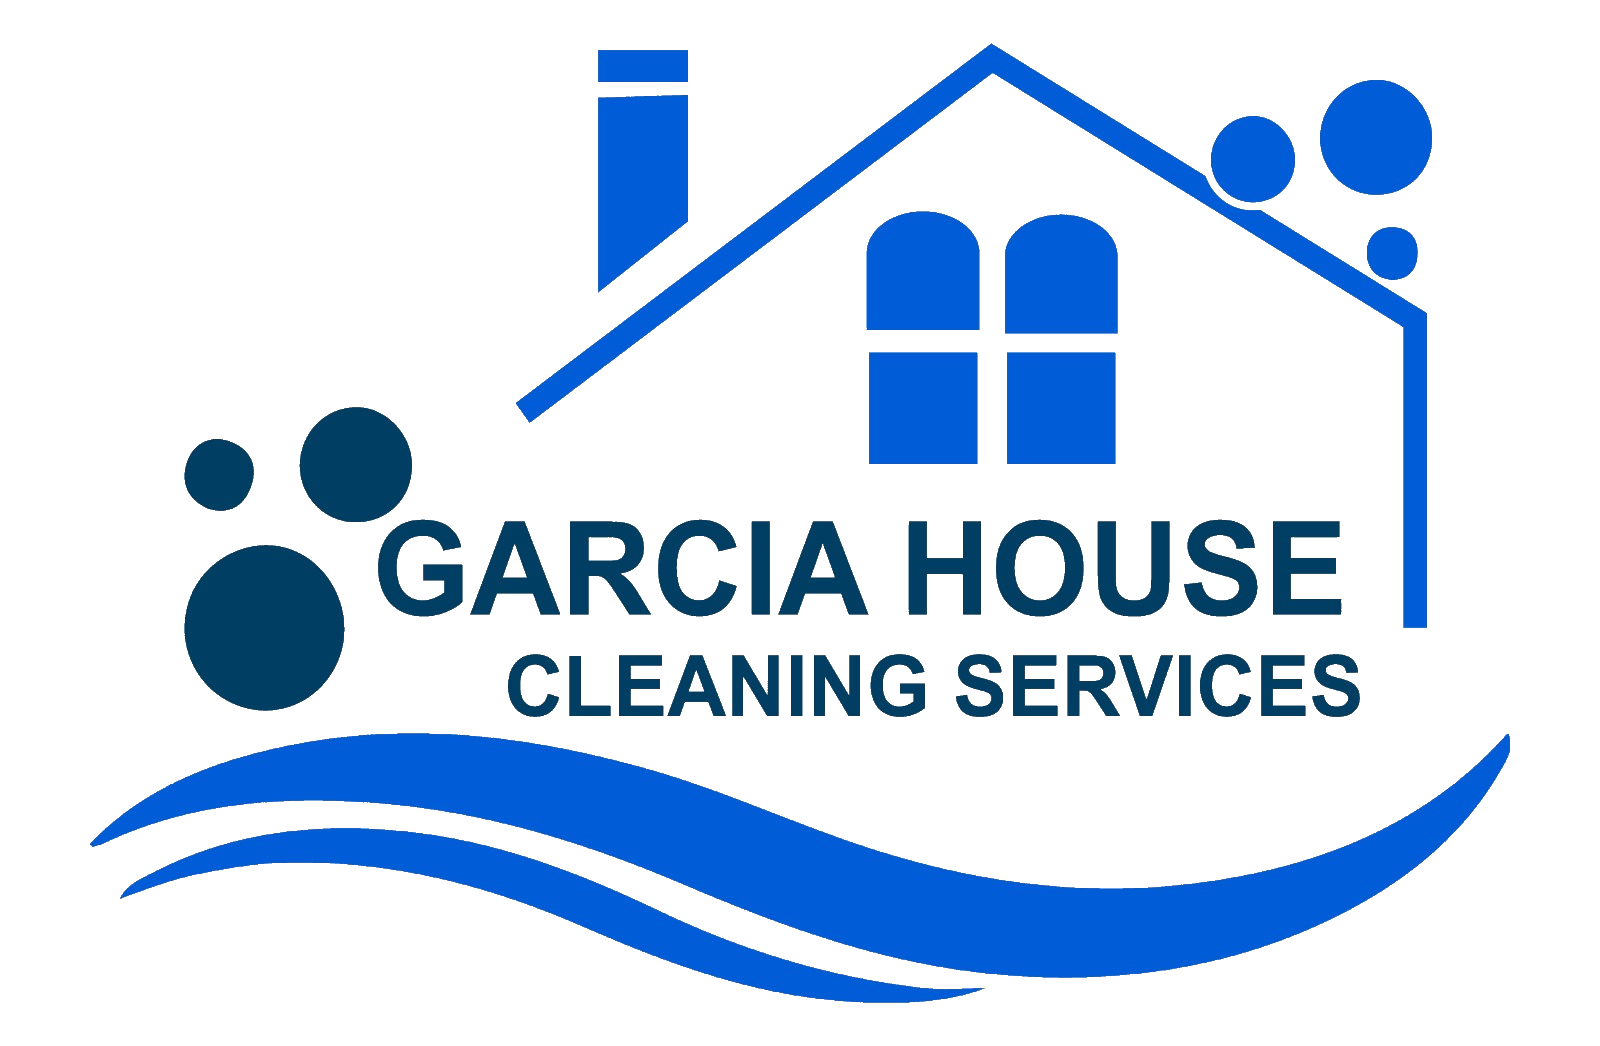 Garcia House Cleaning Services | Garcia House Cleaning Services